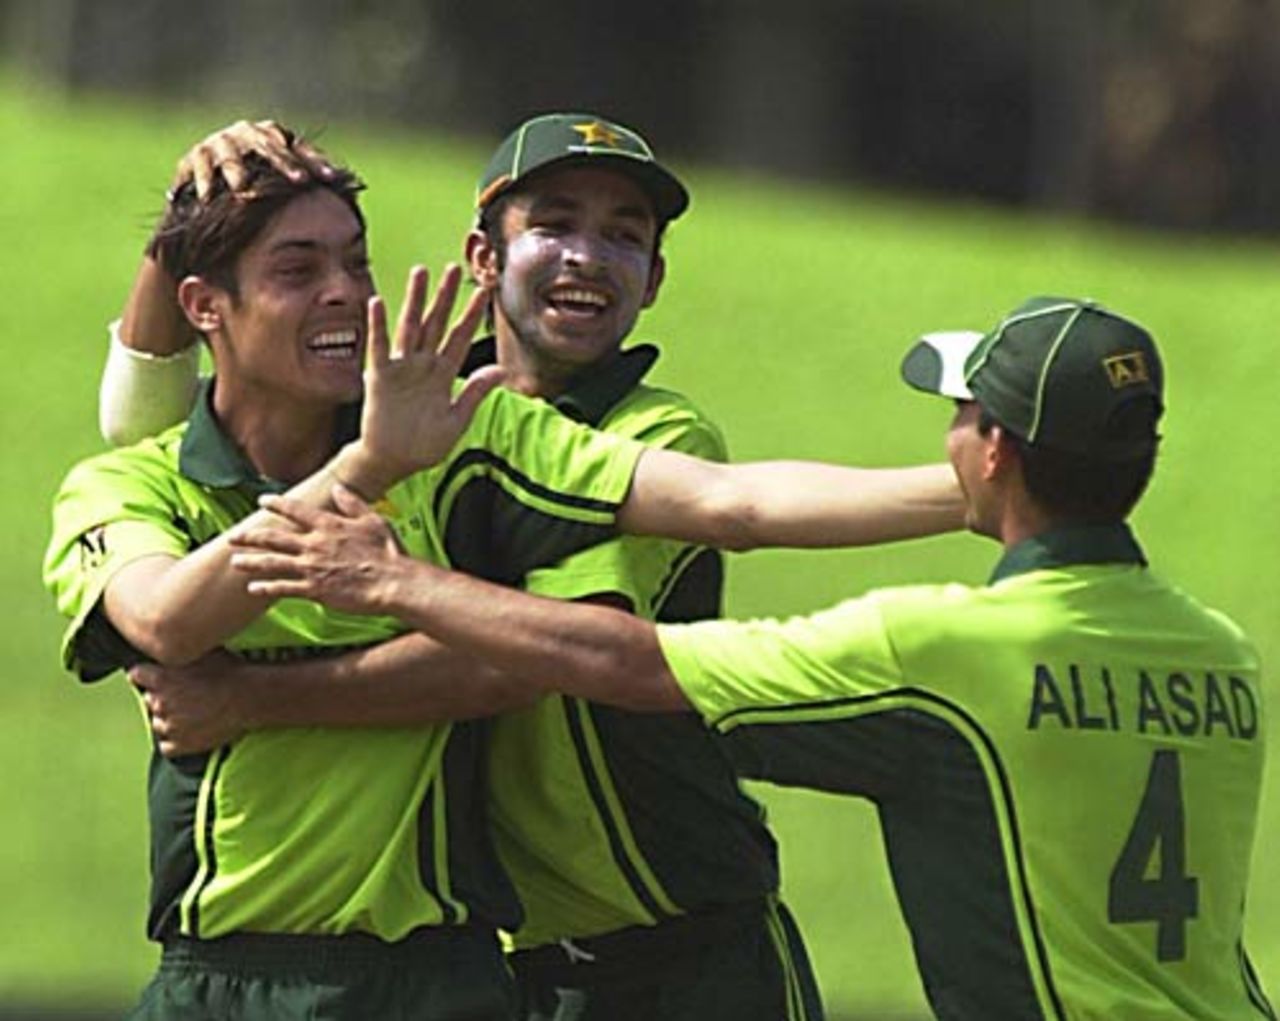 Anwar Ali celebrates a wicket during his 5 for 34, New Zealand v Pakistan, U-19 World Cup, Colombo, February 10, 2006